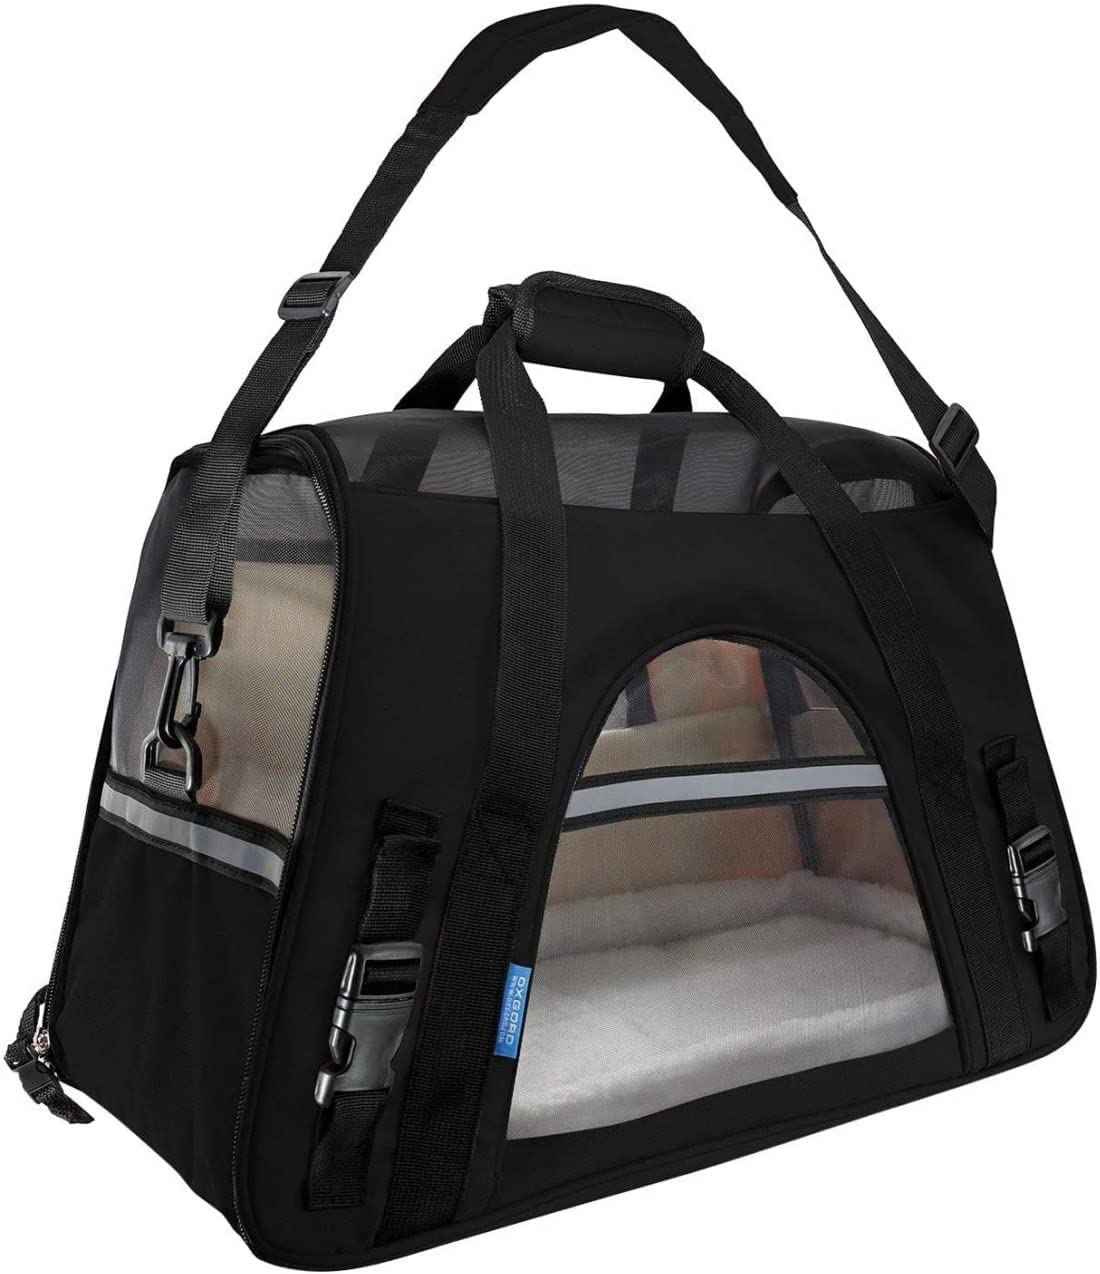 Paws & Pals Pet Carrier Airline Approved Soft-Sided Dogs Cats Kitten Puppy Carrying Bag (Black)(Large) - image 1 of 12